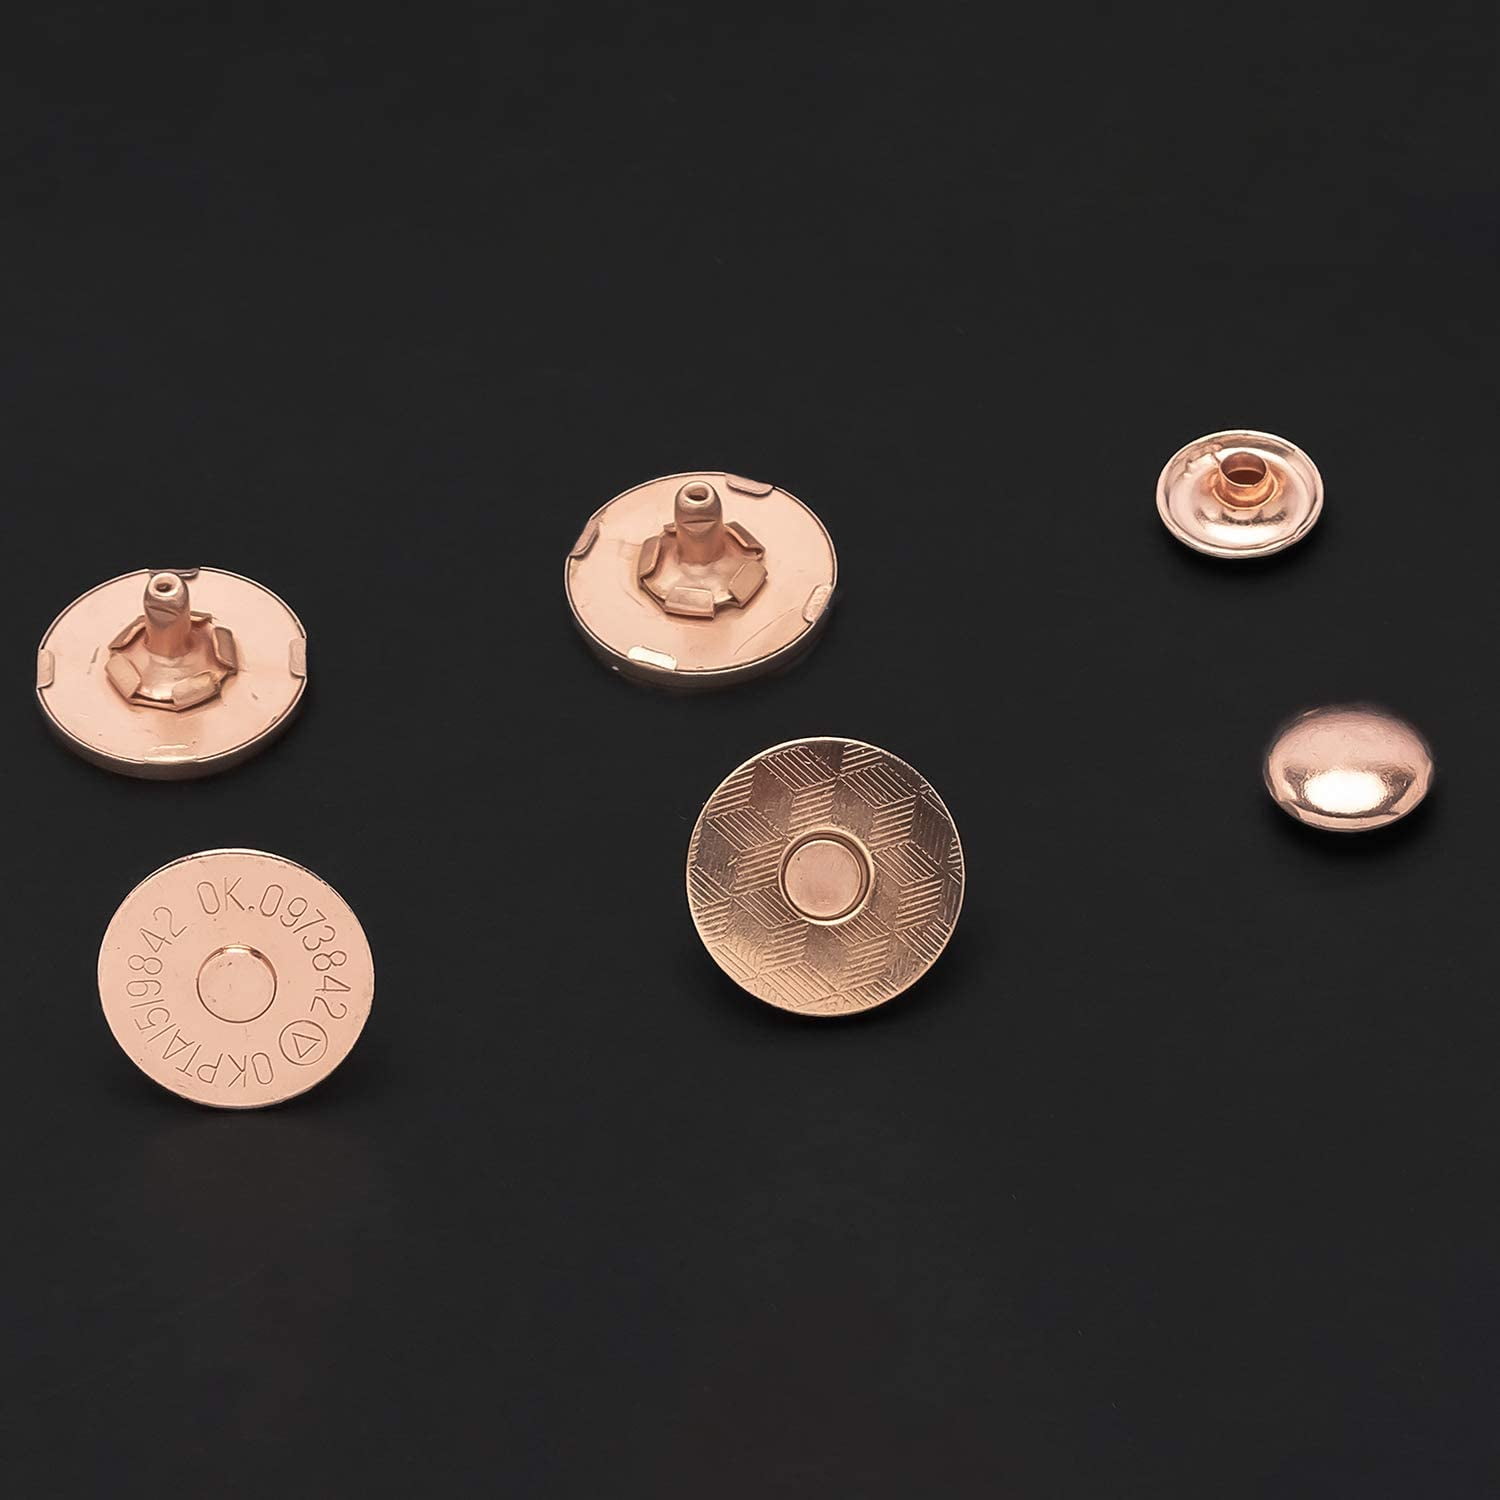 14mm Thin Magnetic Snap Buttons in Black, Bronze, Gold, Rose Gold, Silver  // Bag Purse Wallet Closure Hardware// 2mm thick snap double rivet